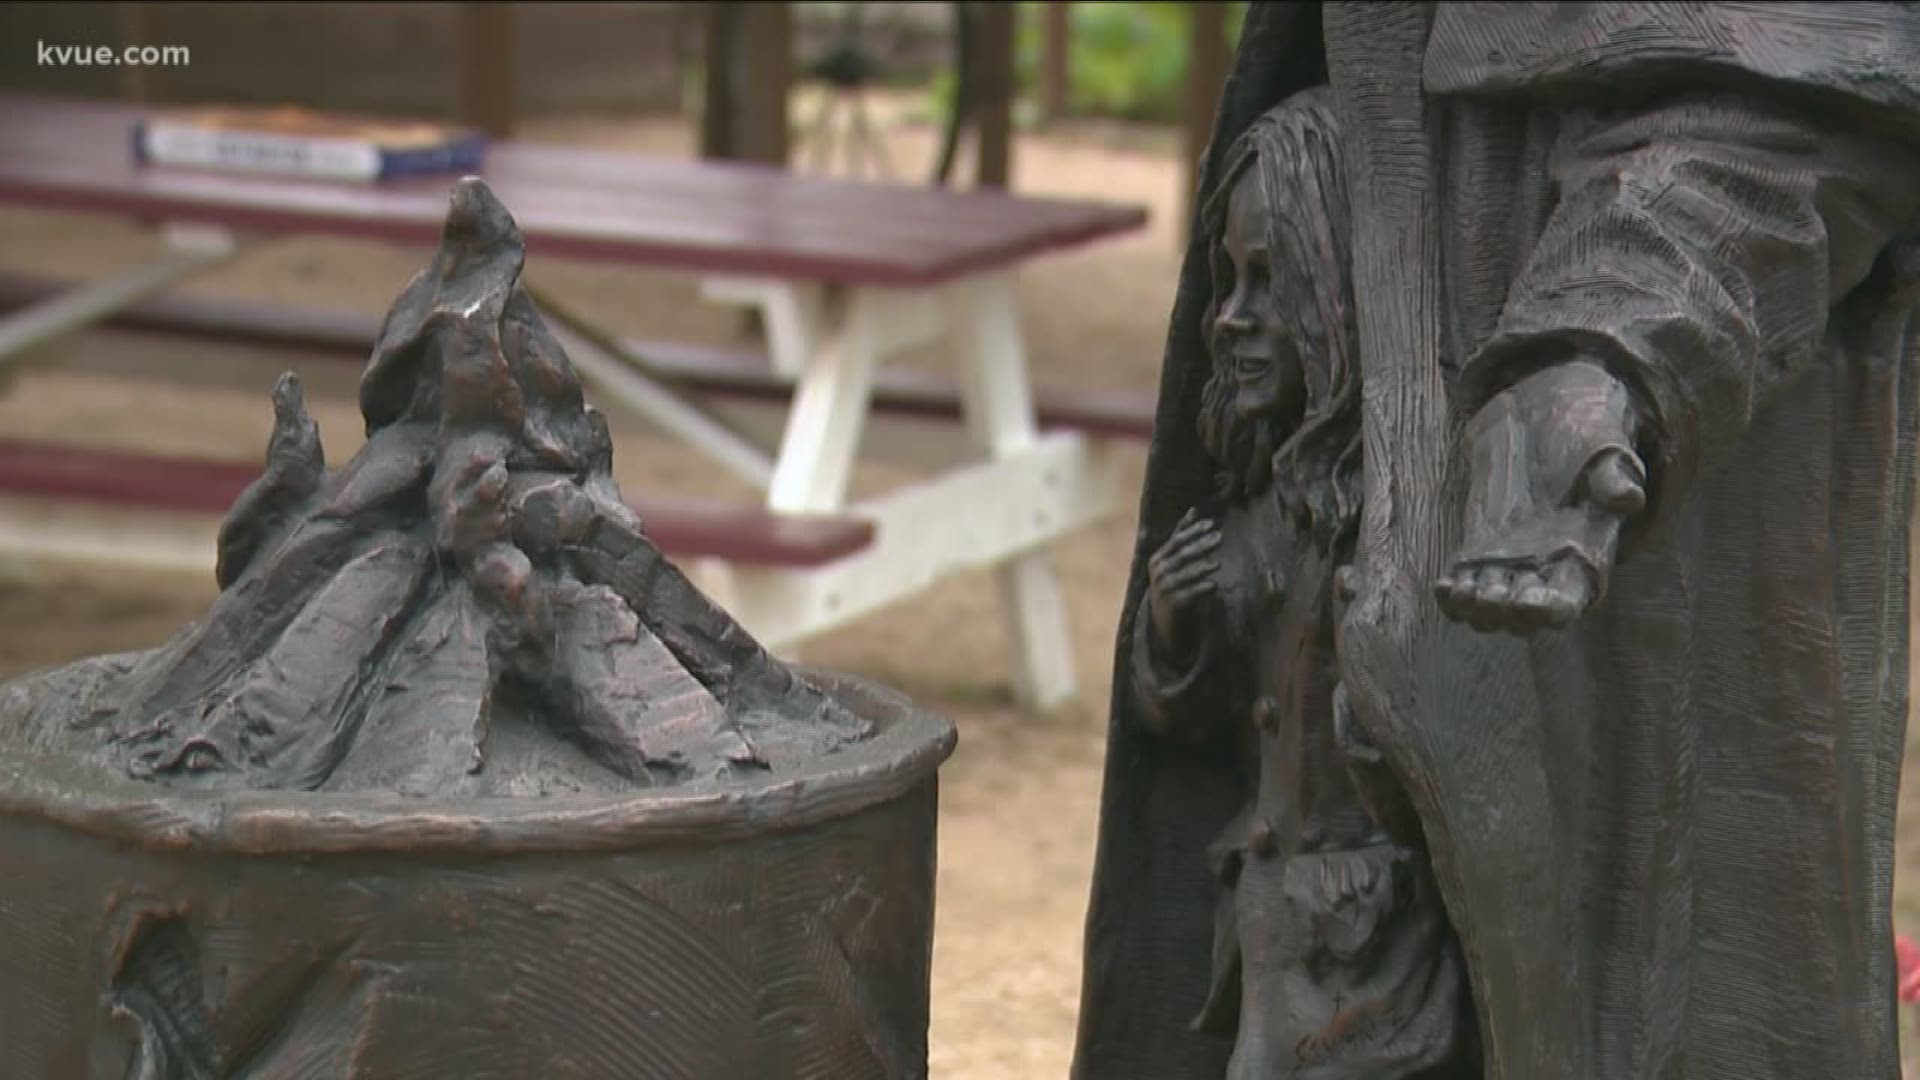 Unveiling statues to honor the homeless. Homeless advocates are trying to put a positive face to those experiencing the traumatic life event.